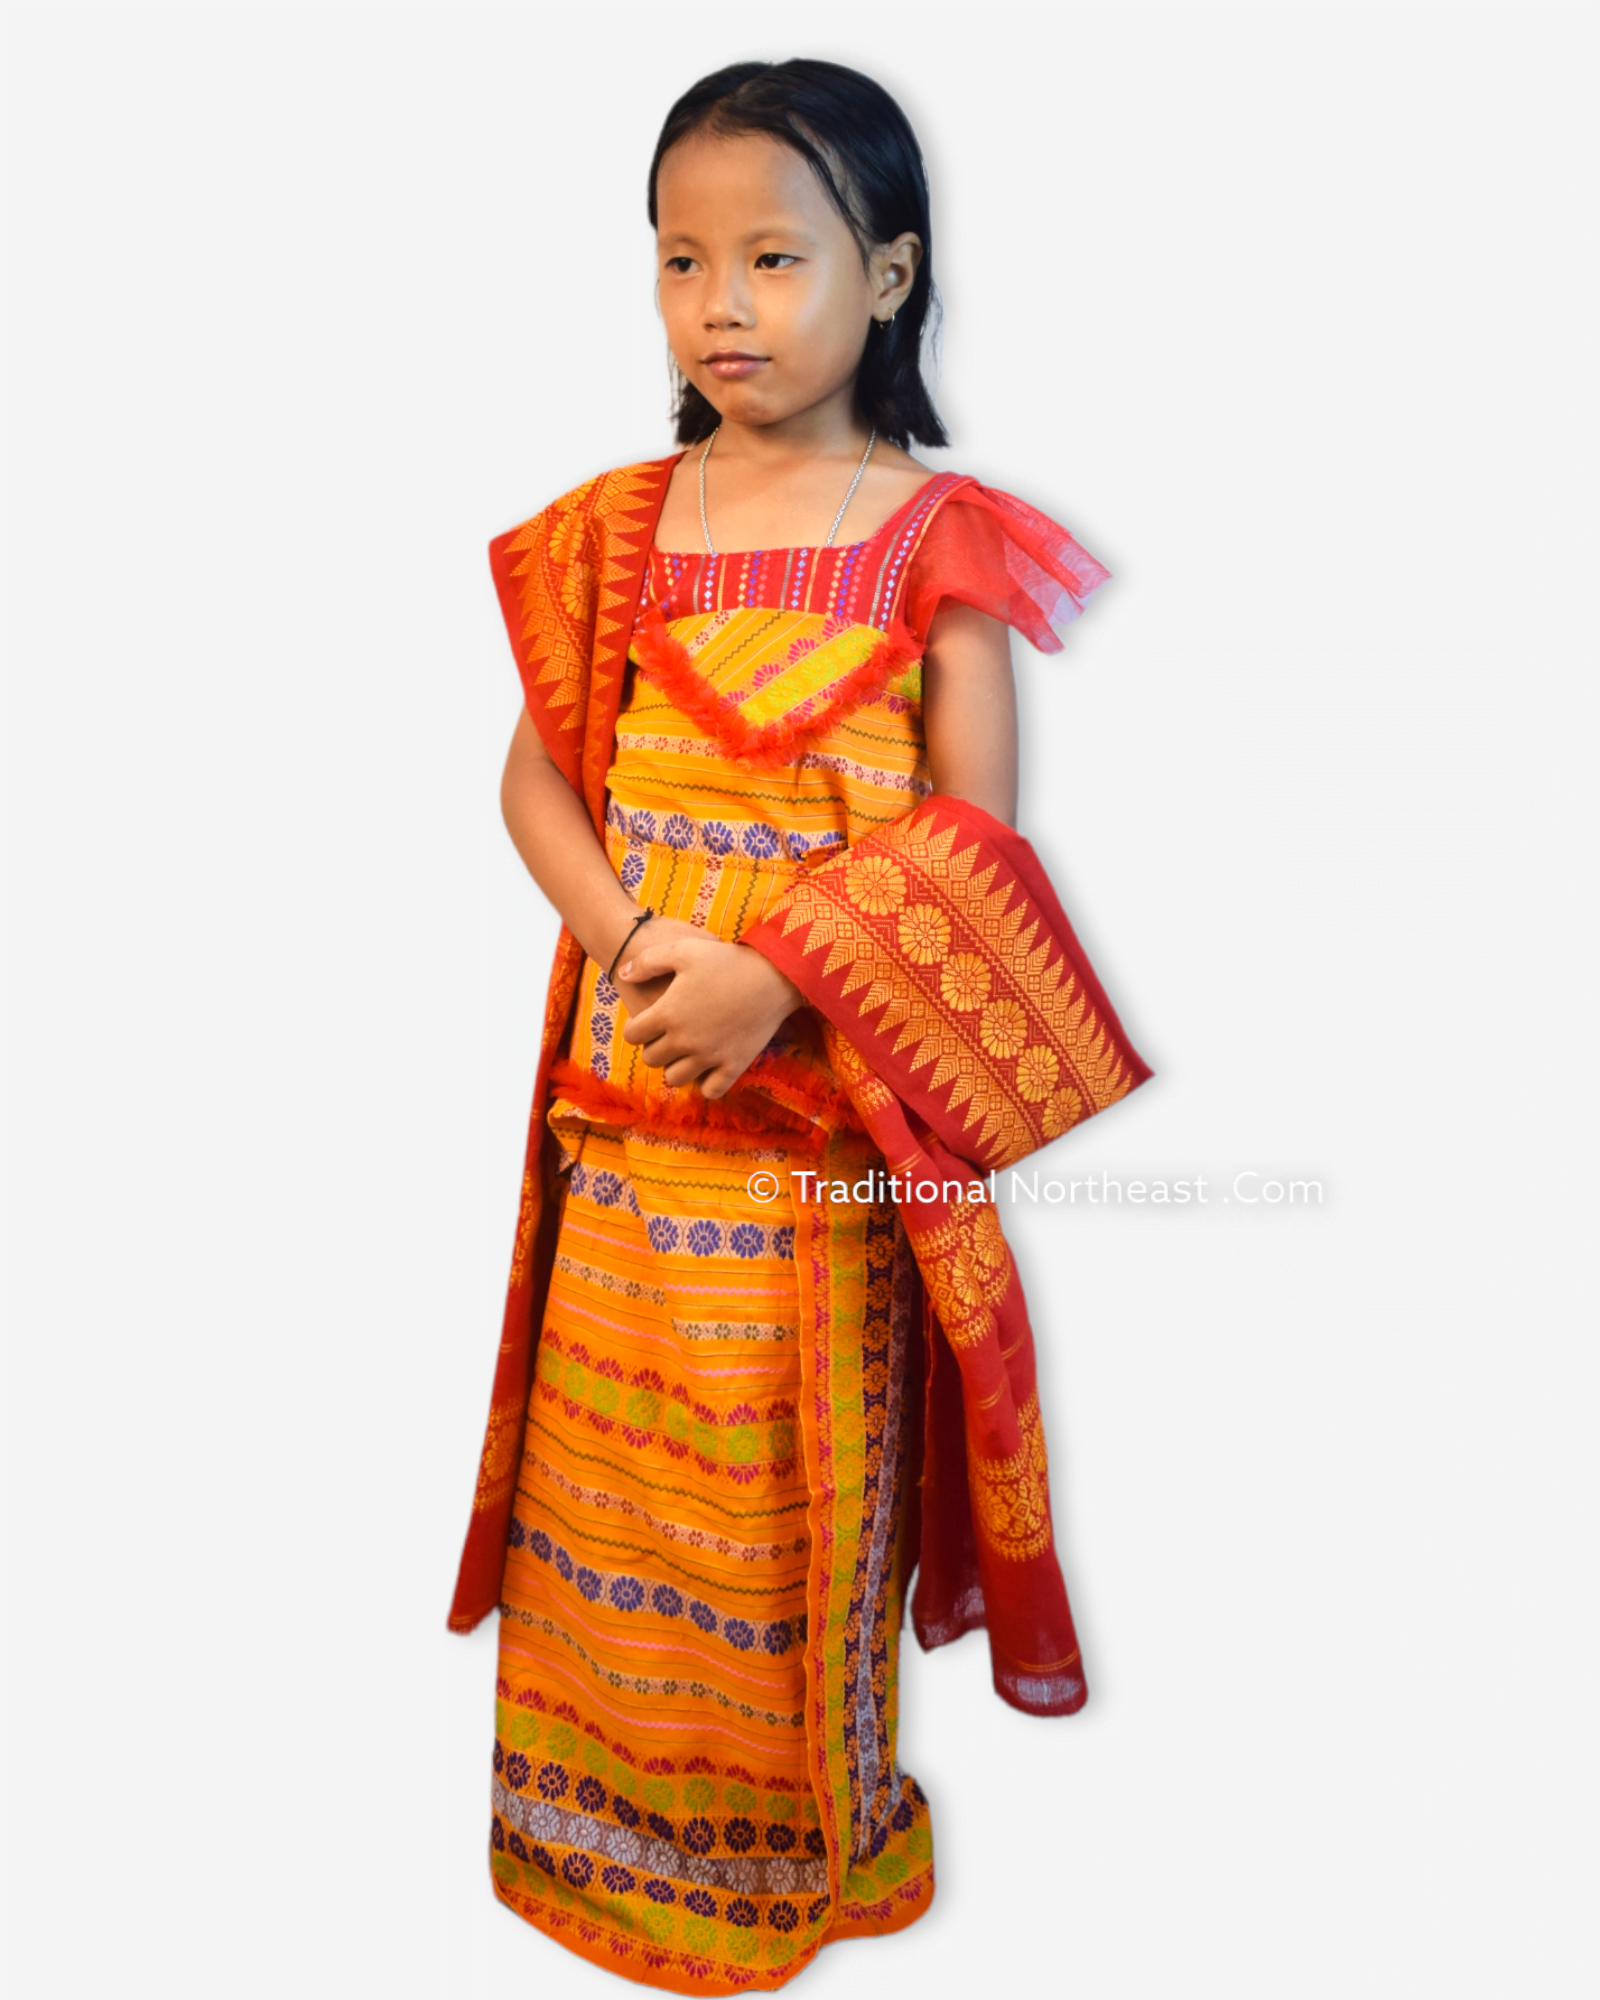 387 Bihu Dress Royalty-Free Images, Stock Photos & Pictures | Shutterstock